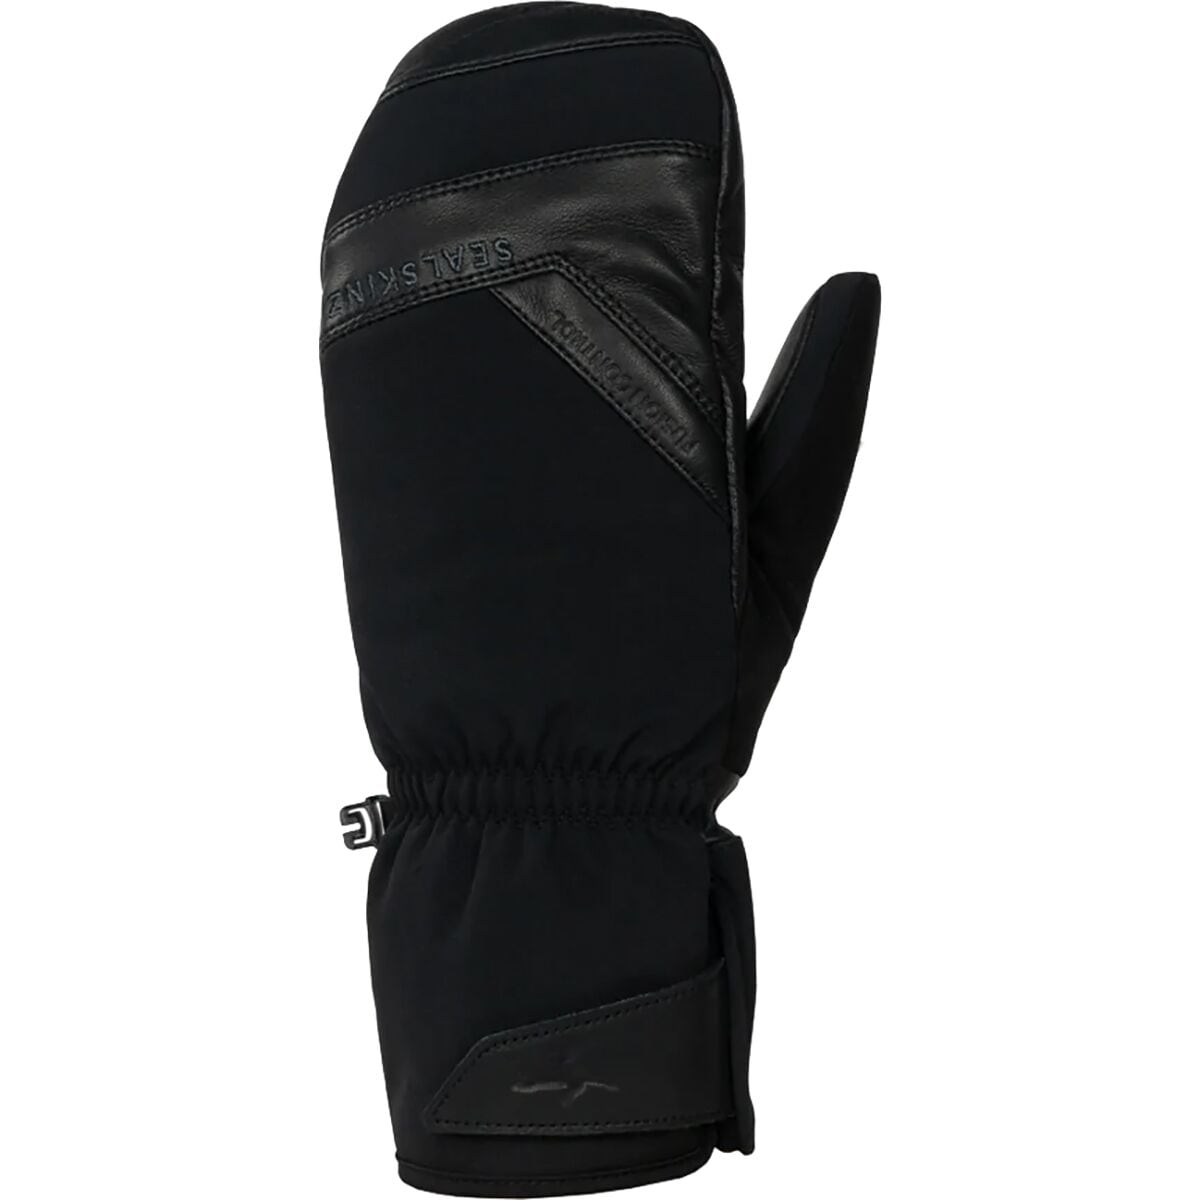 SealSkinz Waterproof Extreme Weather Insulated Mitten + Fusion Control